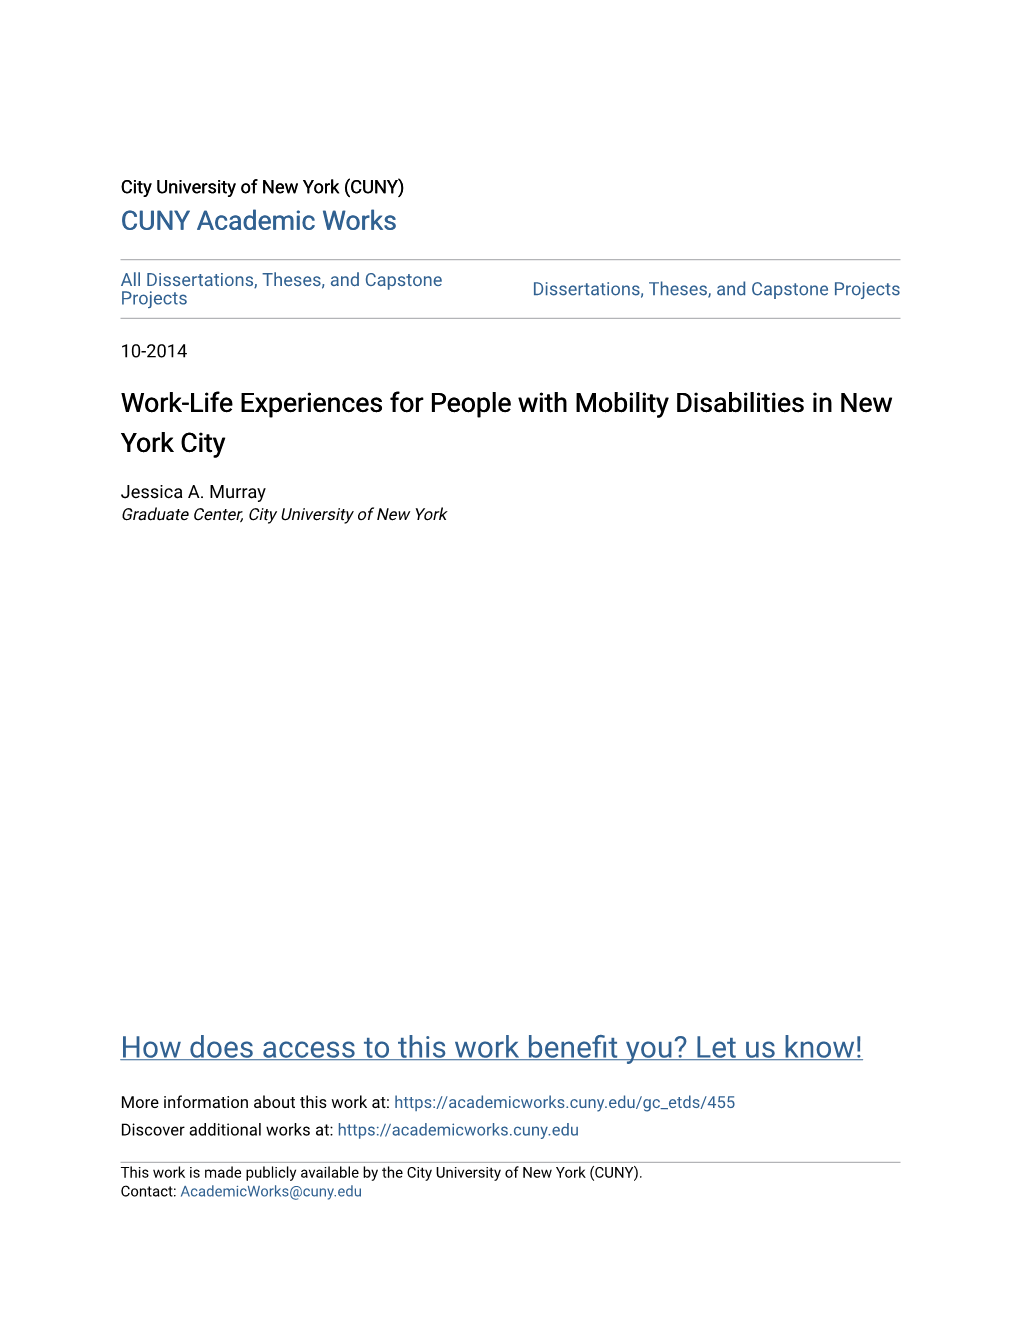 Work-Life Experiences for People with Mobility Disabilities in New York City